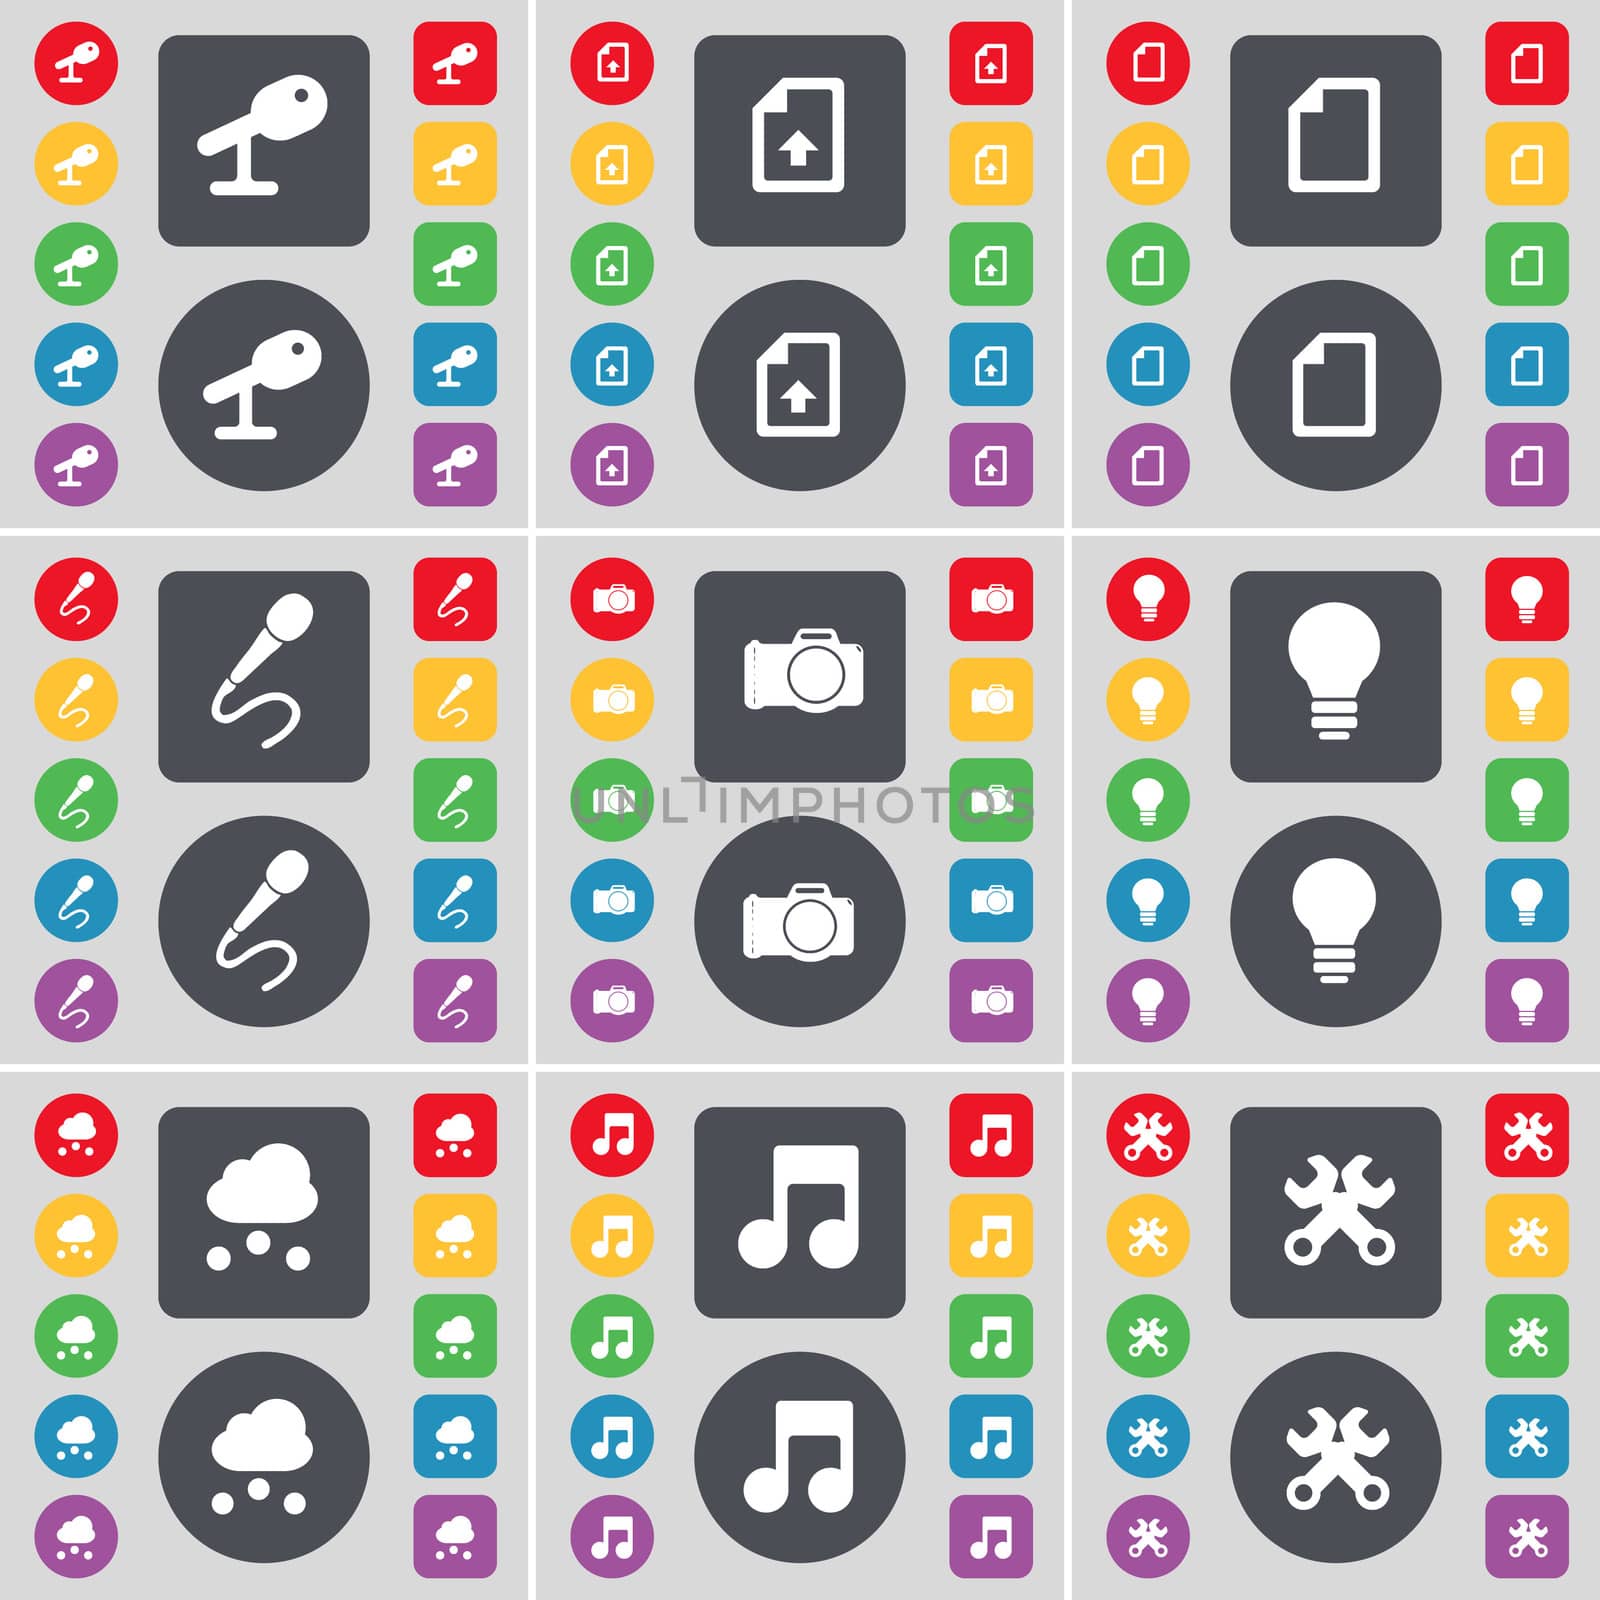 Microphone, Upload file, Microphone, Camera, Light bulb, Cloud, Note, Wrench icon symbol. A large set of flat, colored buttons for your design. illustration